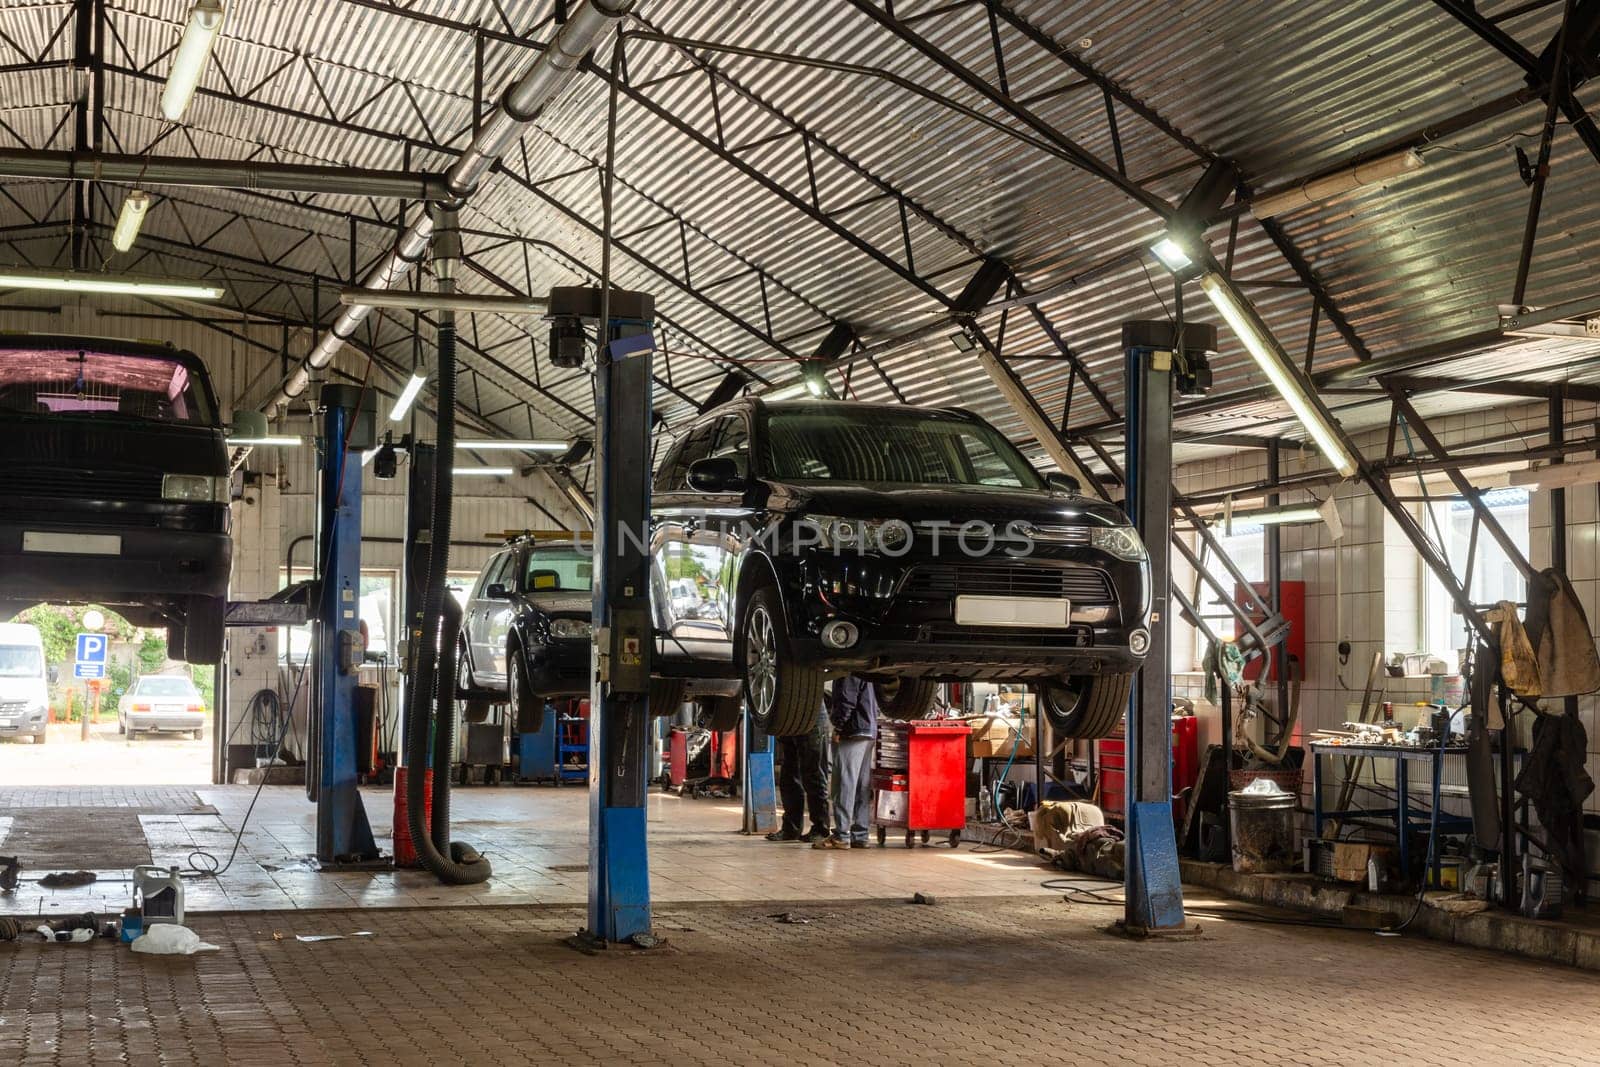 Cars in automobile repair service center. Modern car repair station with a large number of lifts and specialized equipment for diagnostics and service repair car